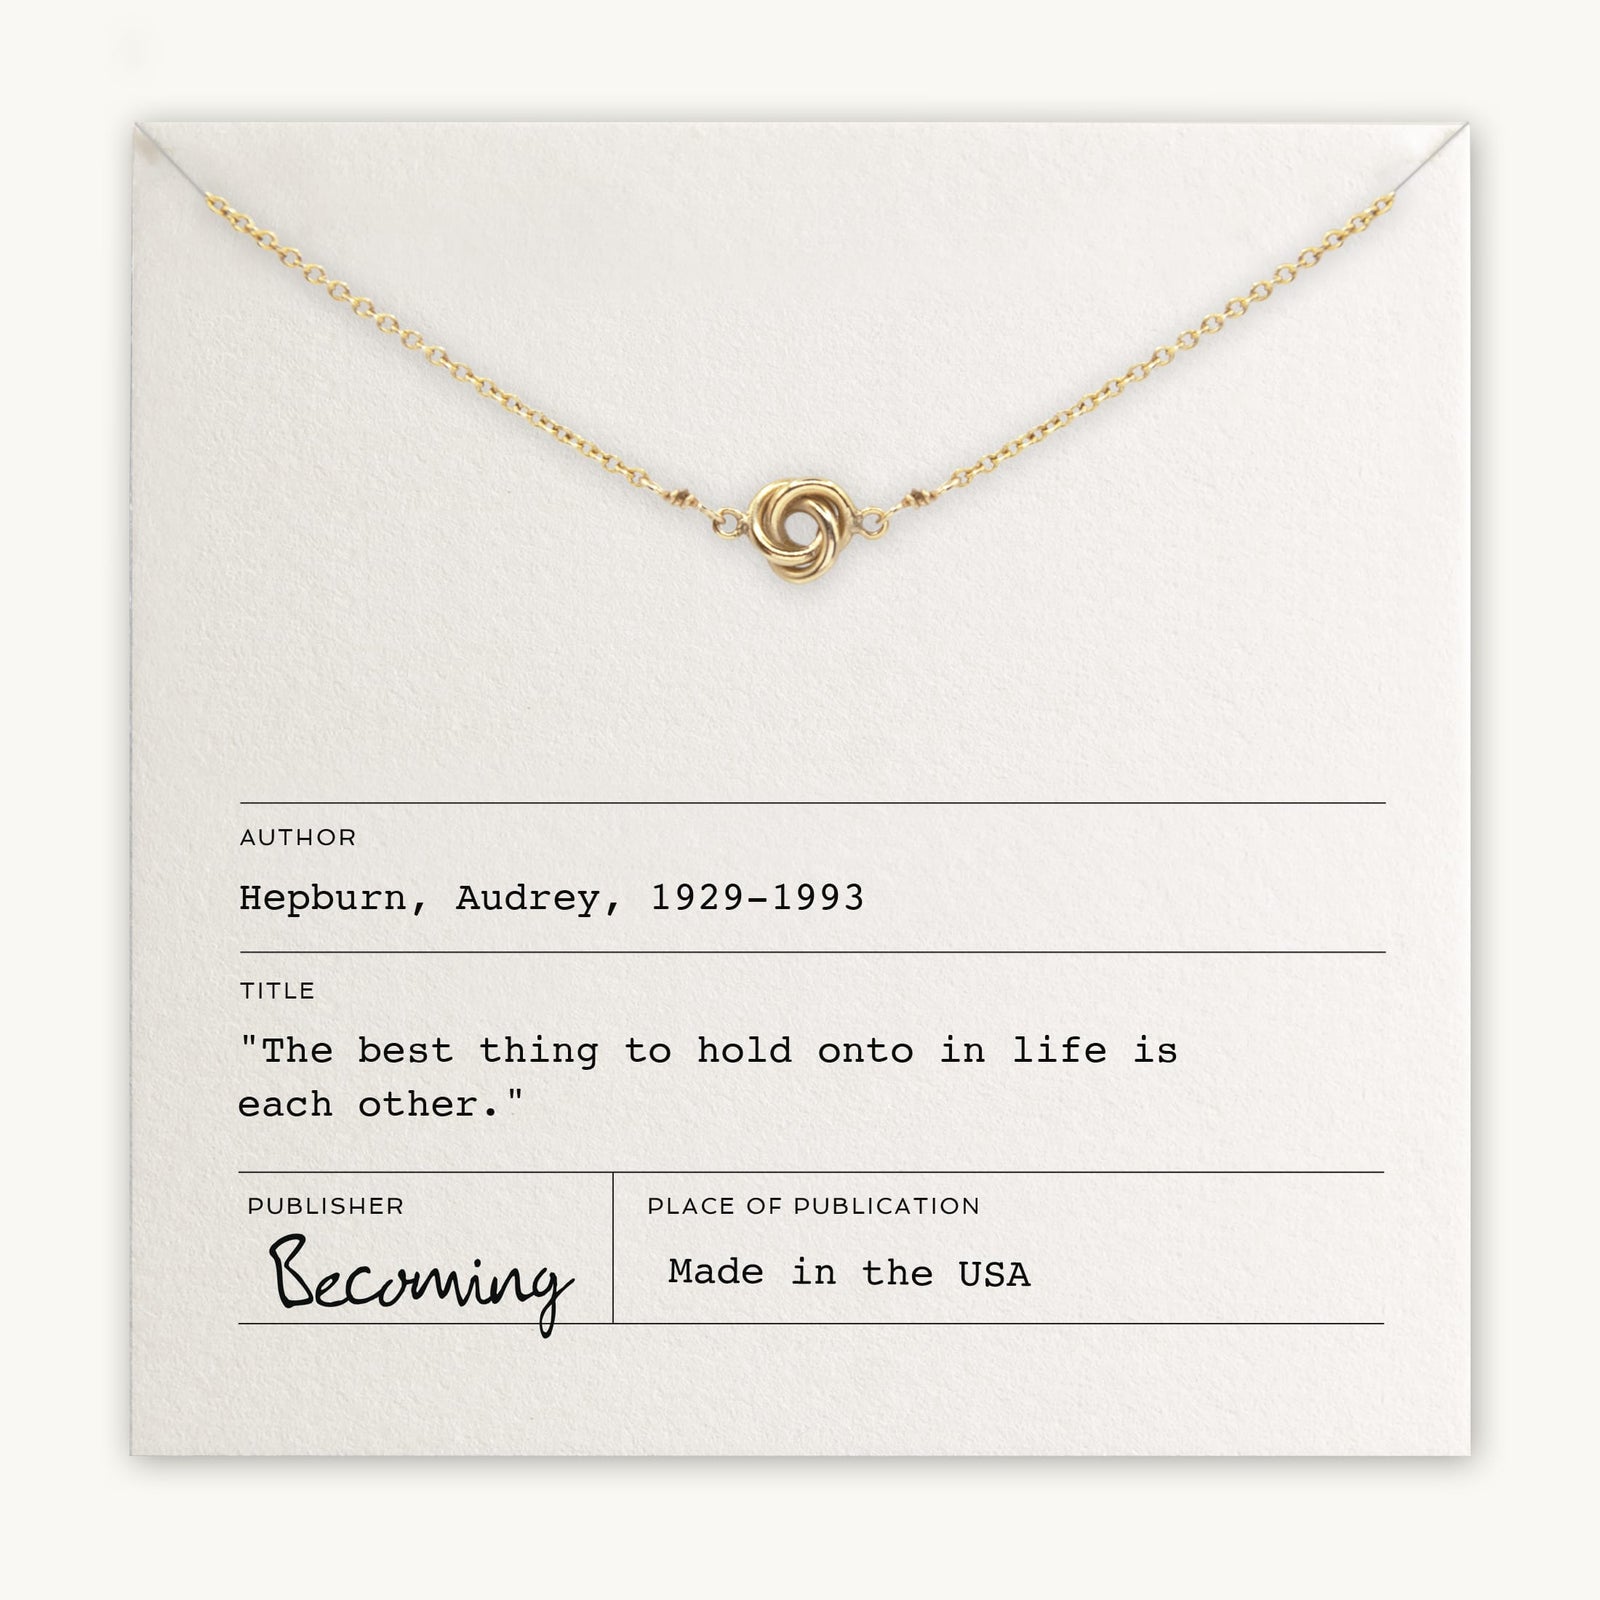 Becoming Jewelry's Love Knot Necklace with a knot pendant displayed on a card with an Audrey Hepburn quote.